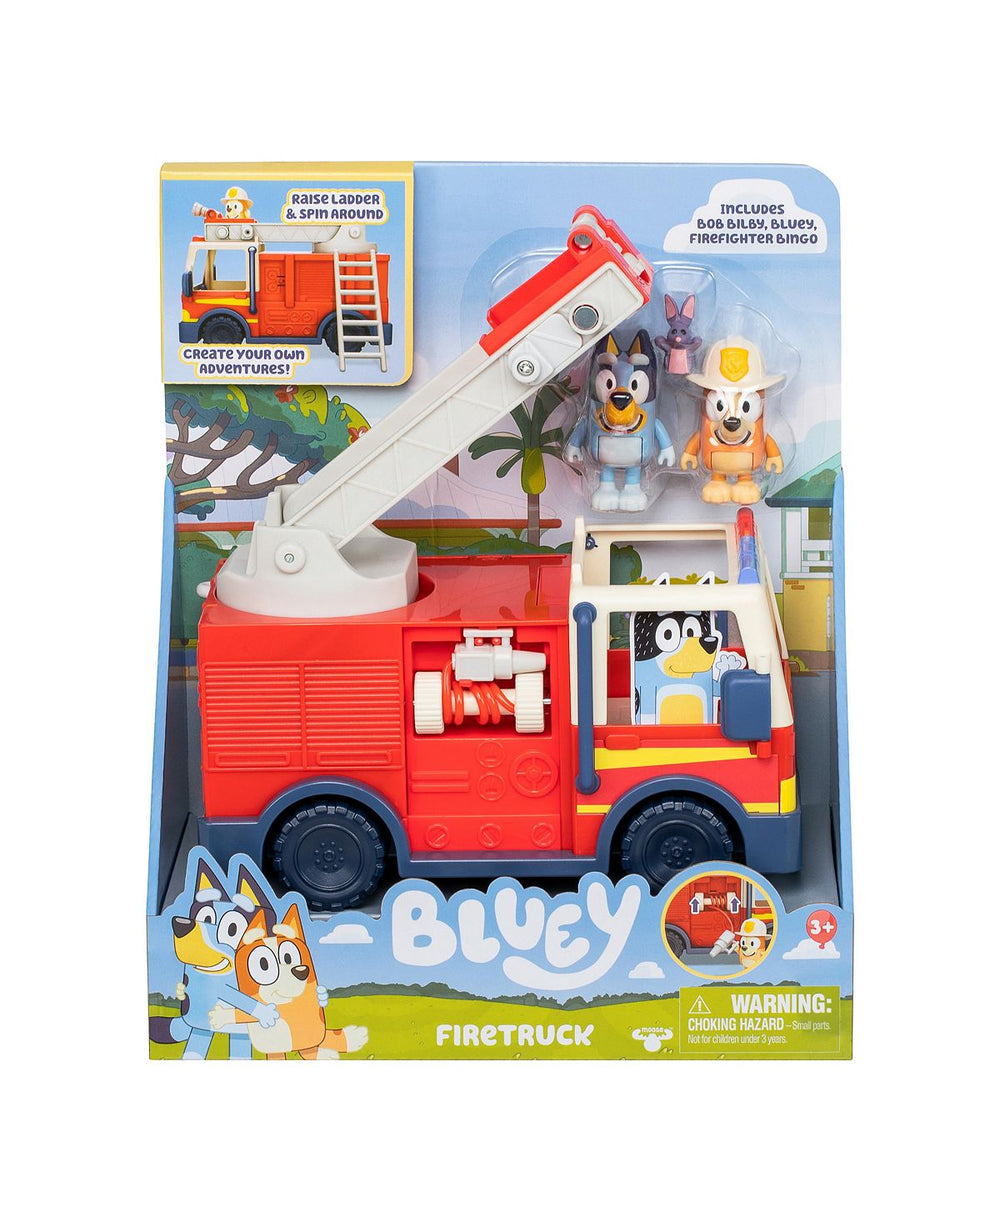 Bluey S10 Fire Truck Playset with Figures and Accessories